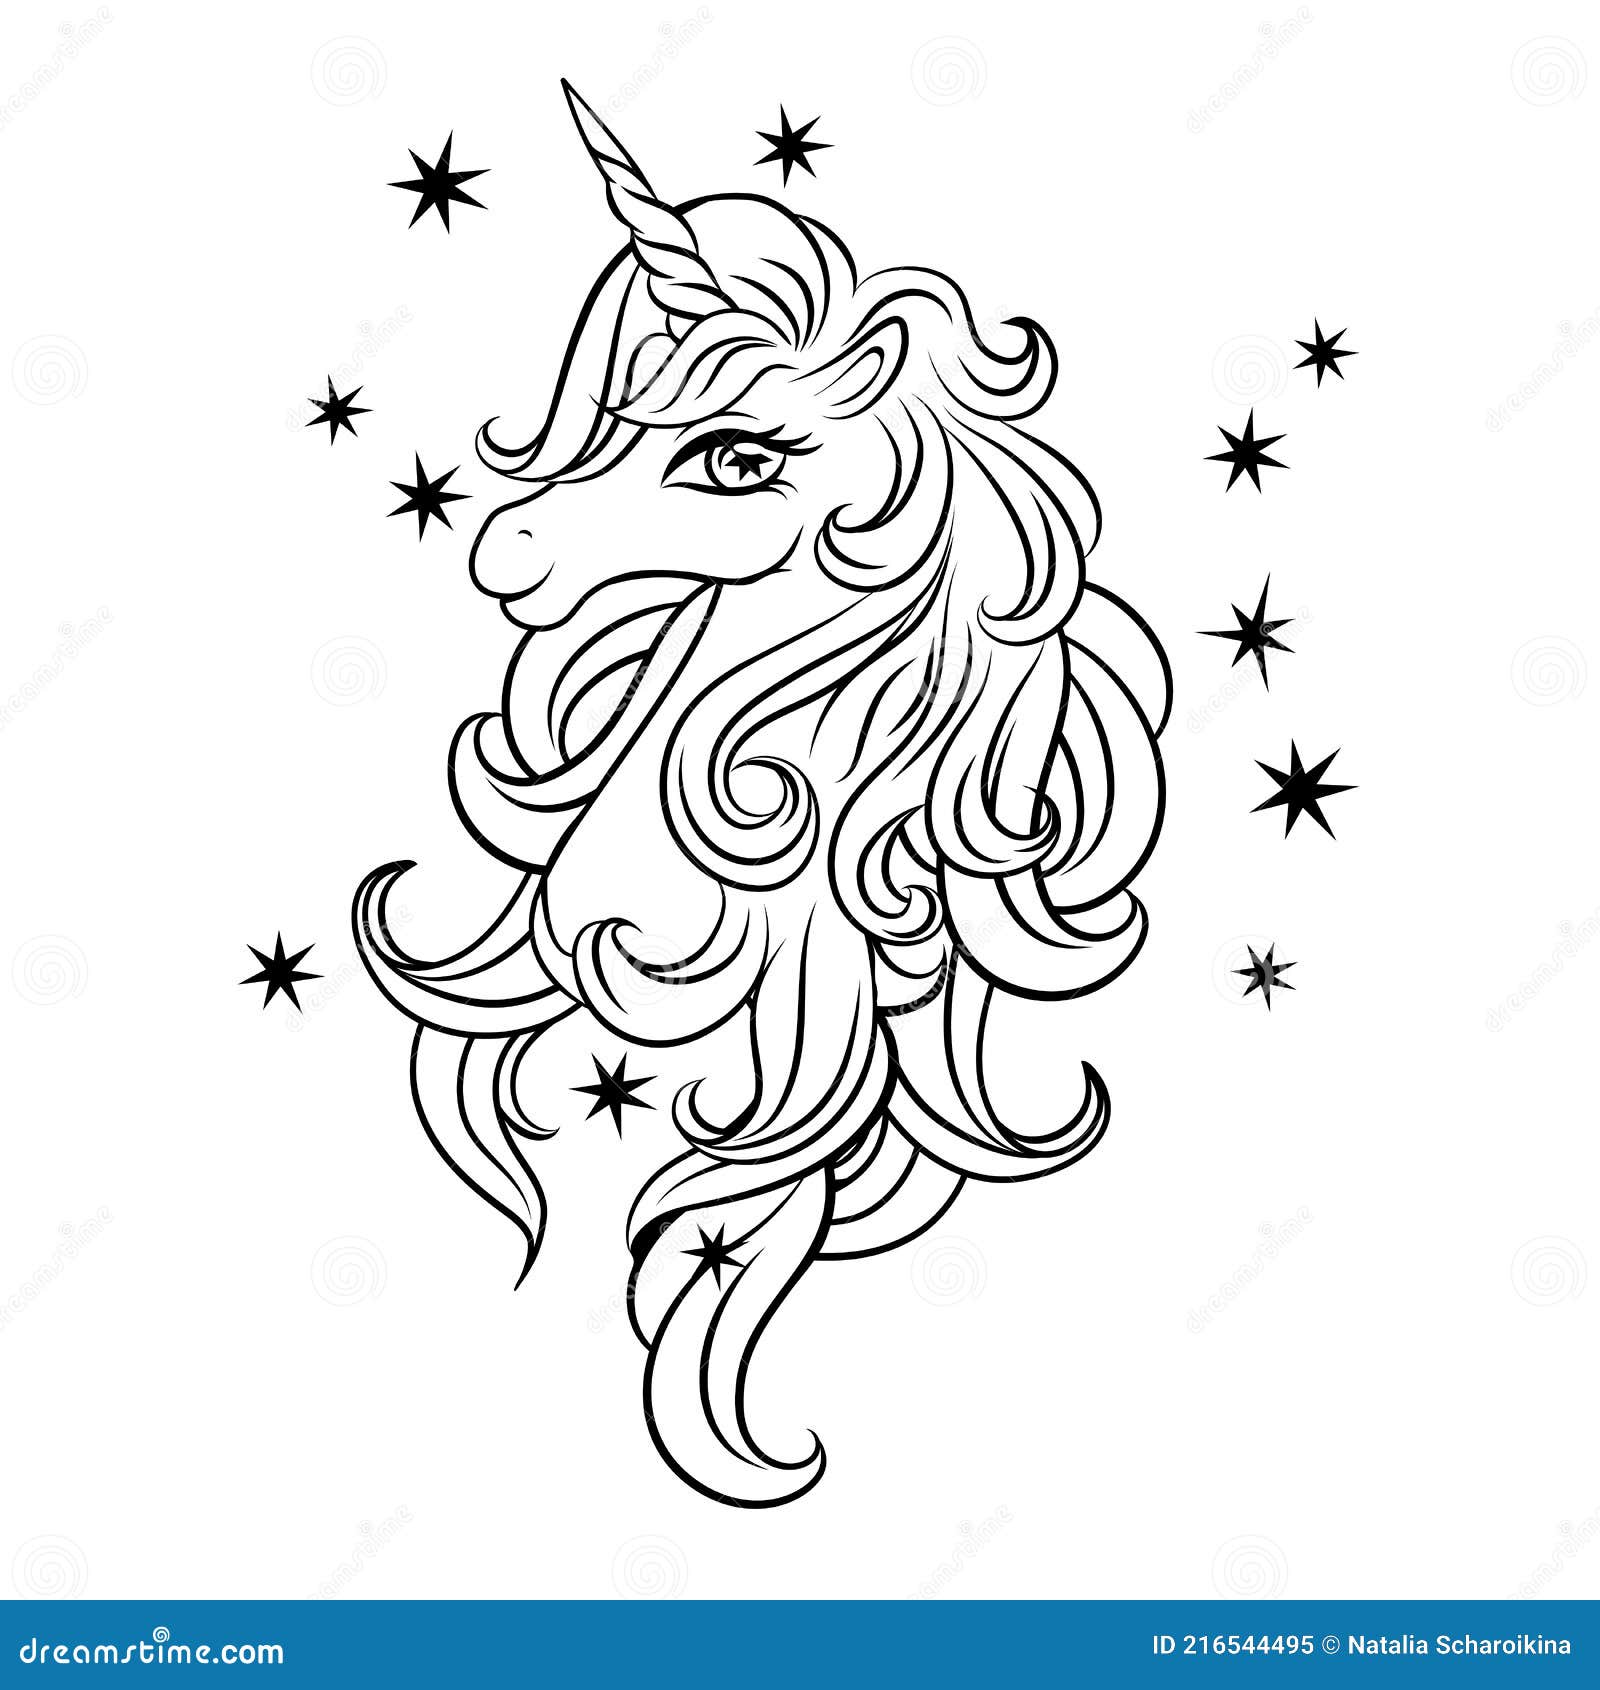 Head of a cute magical unicorn with stars black outline of a unicorn head coloring book stock vector